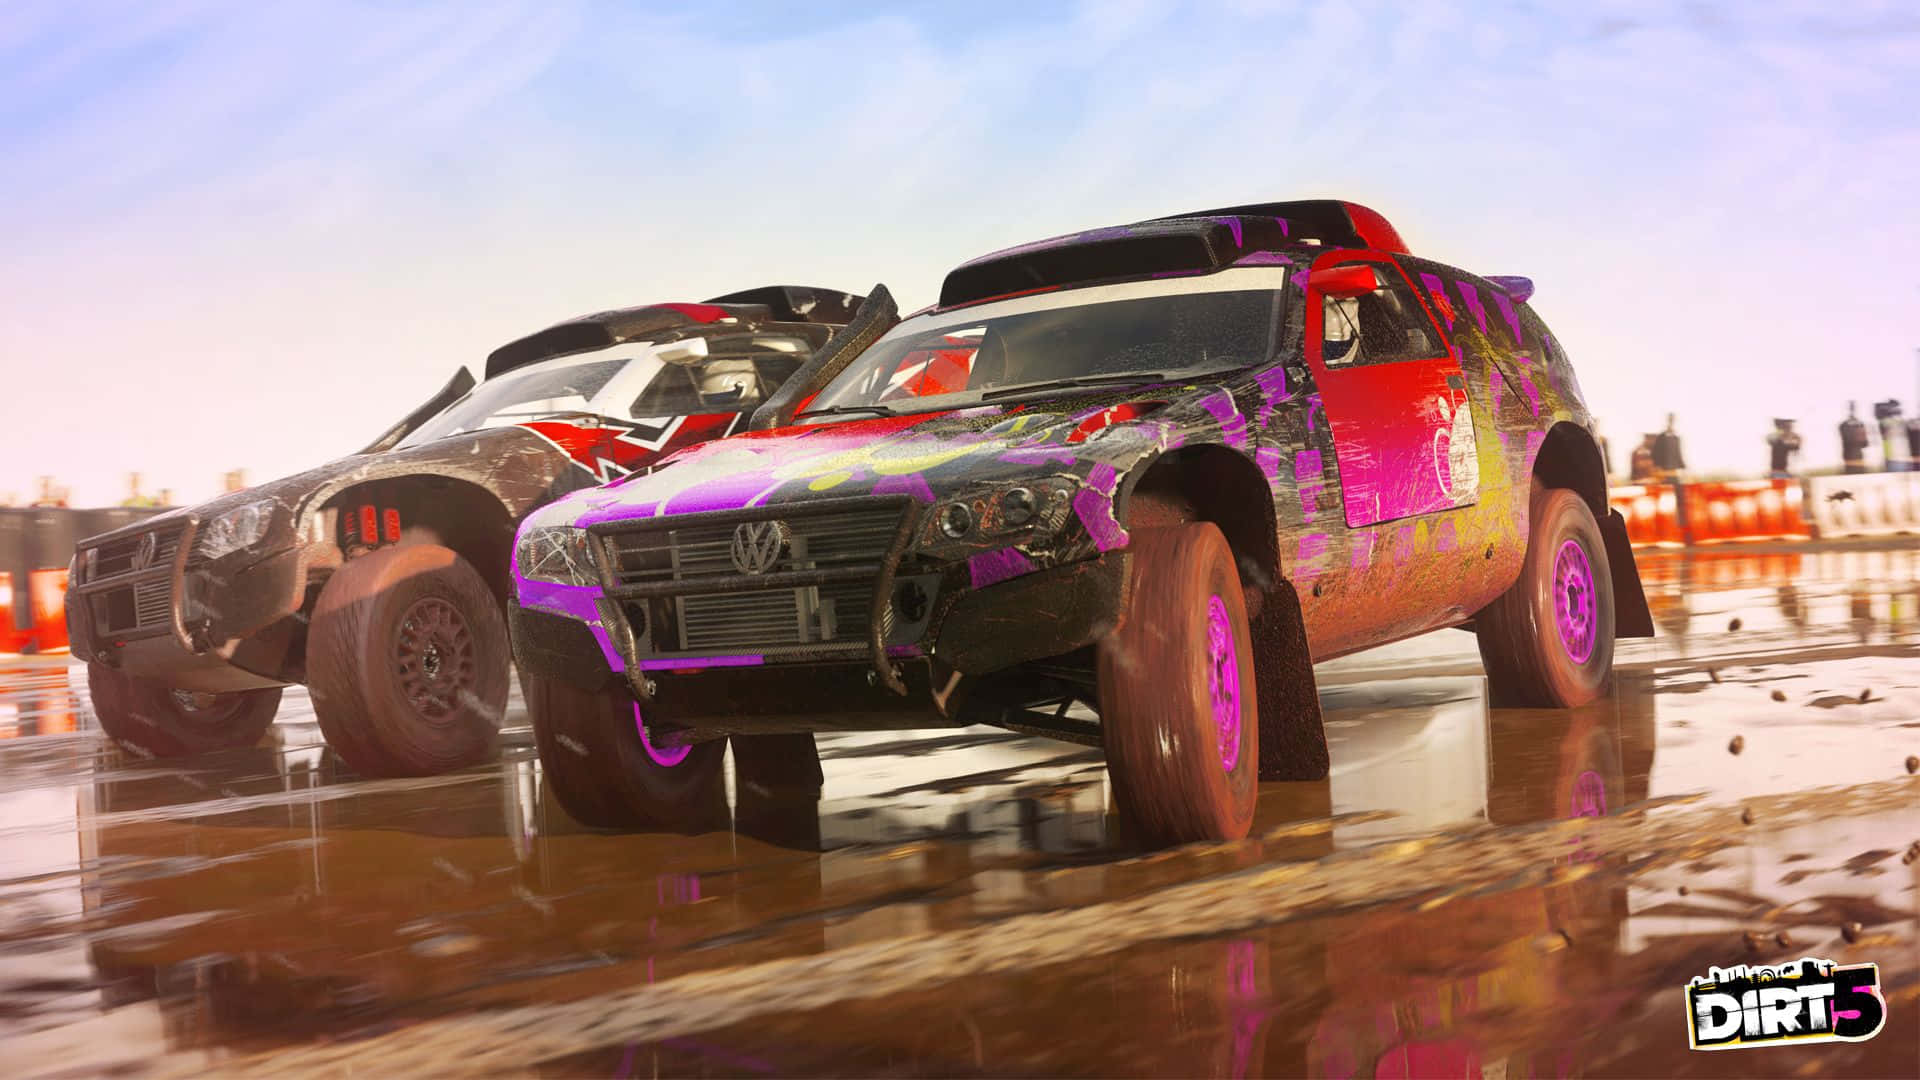 Race around tough bends with the Dirt Game Wallpaper